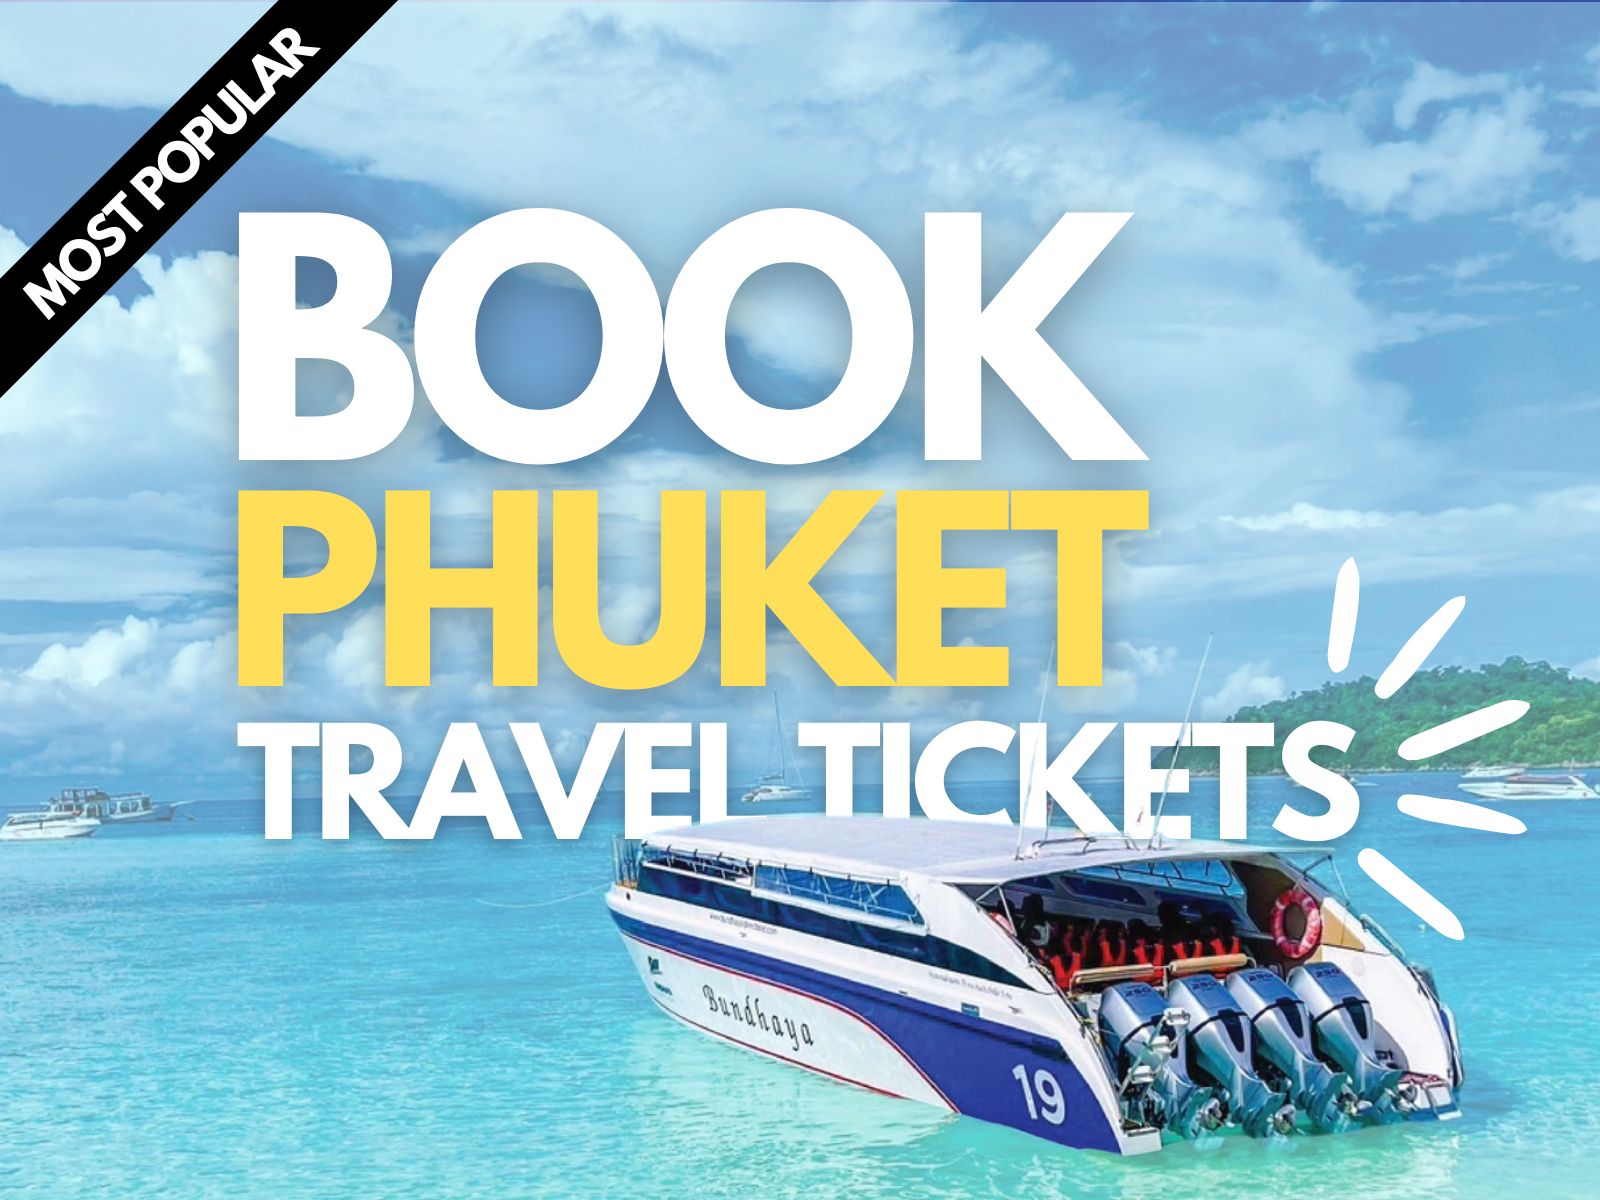 Book a Private Phi Phi Island Tour From Phuket with Five Star Thailand